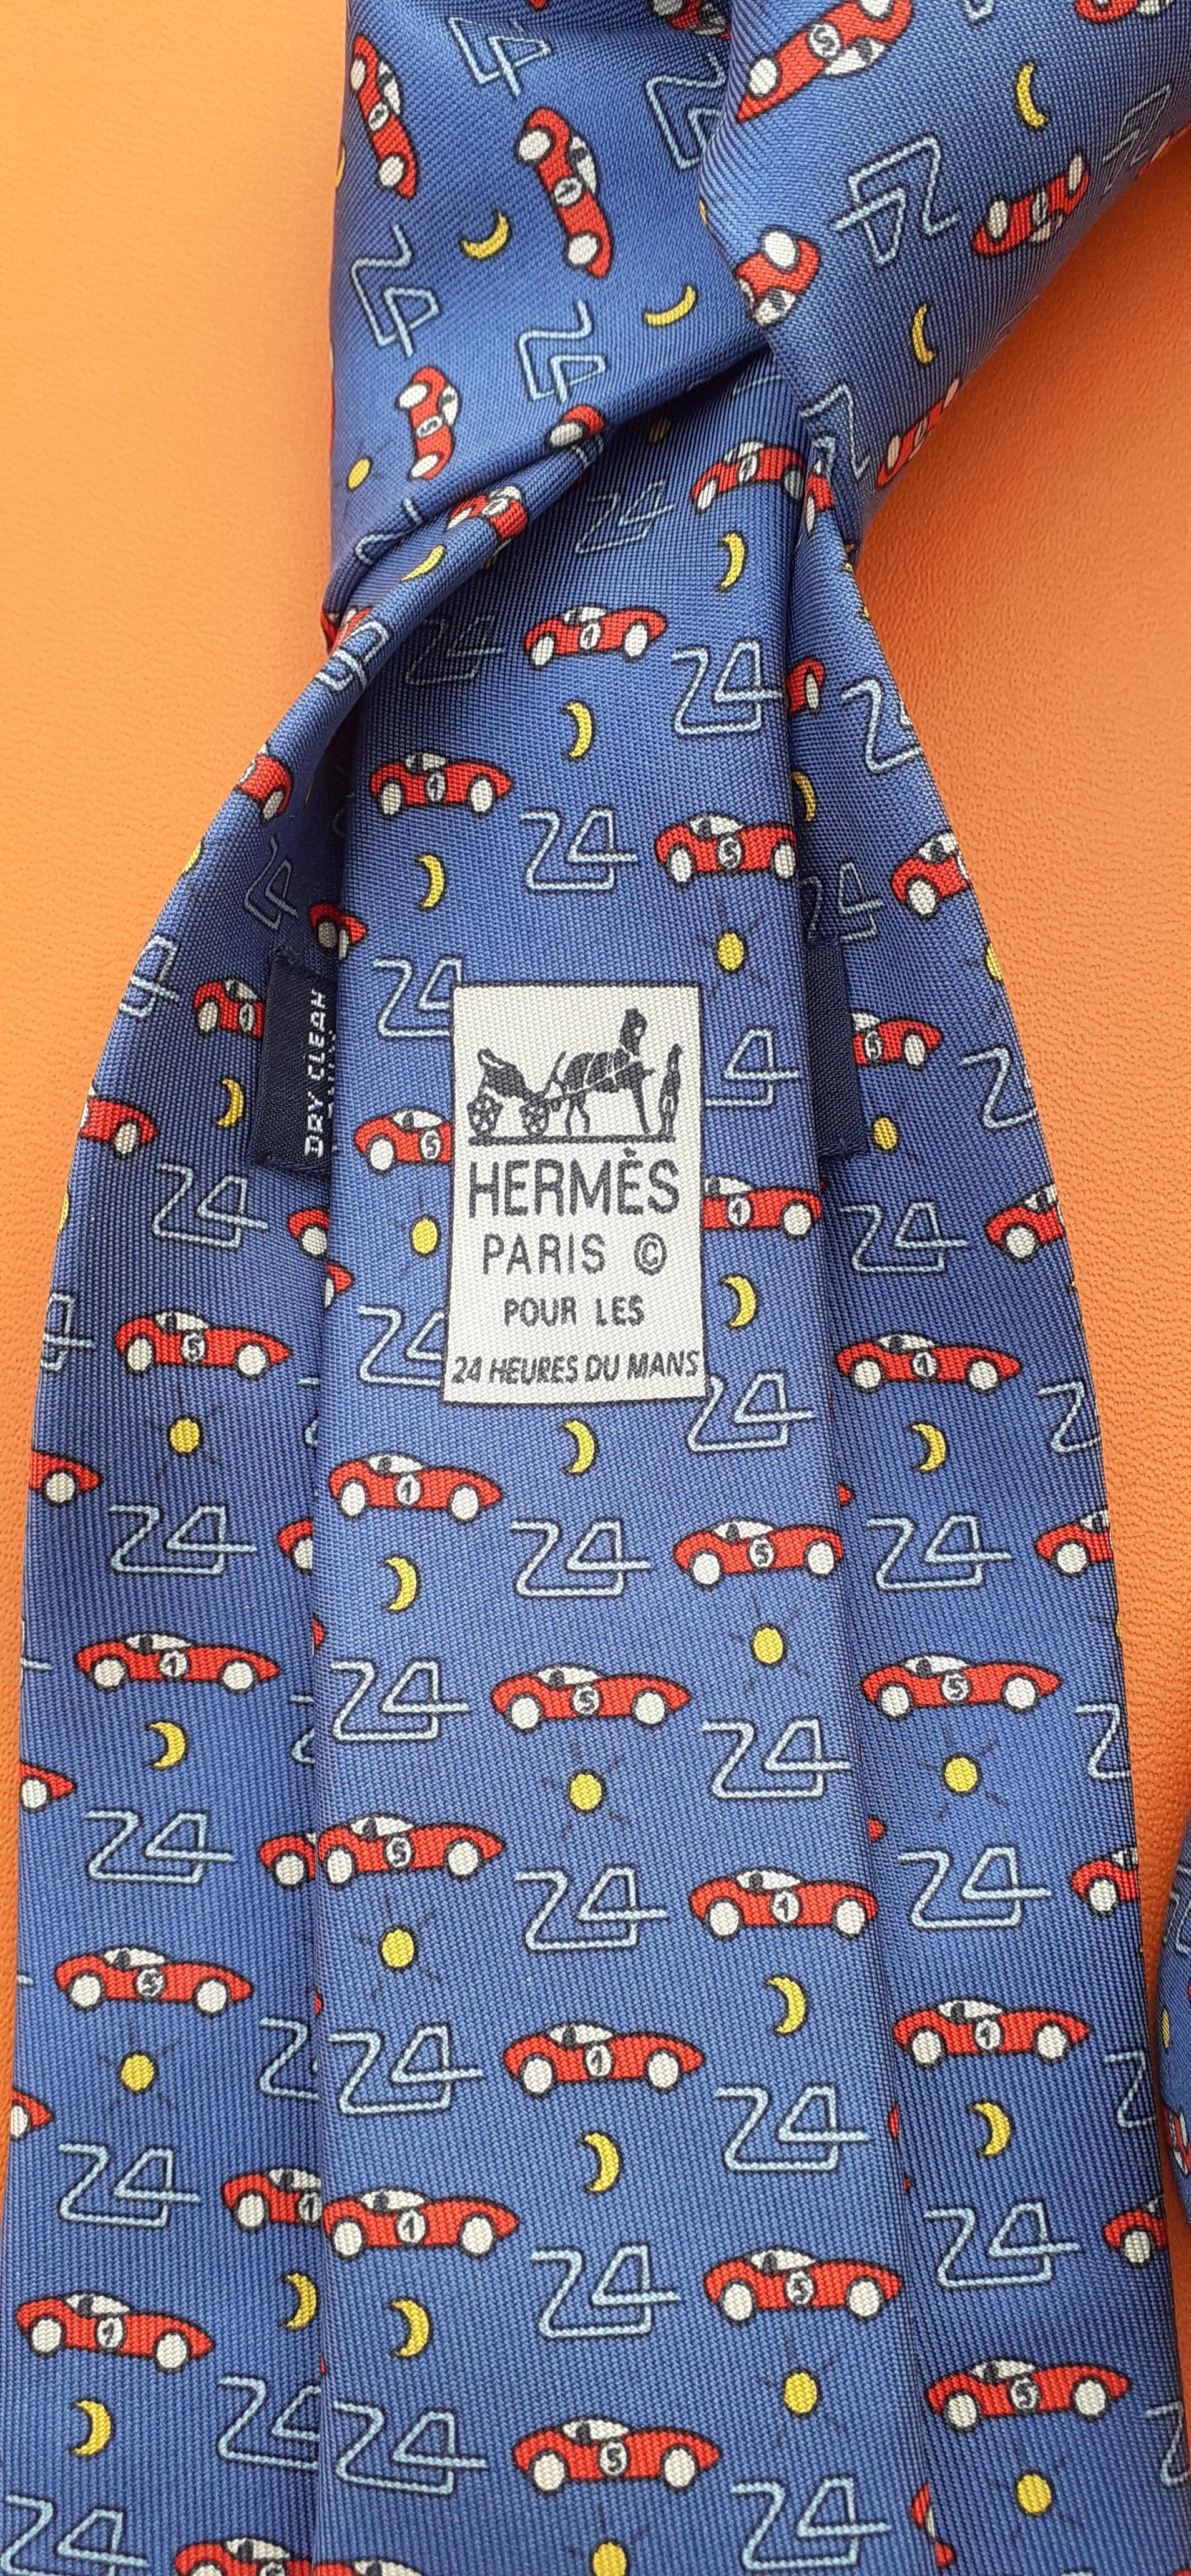 Exceptional Hermès Silk Tie Cars Print For The 24 Hours of Le Mans Race 1